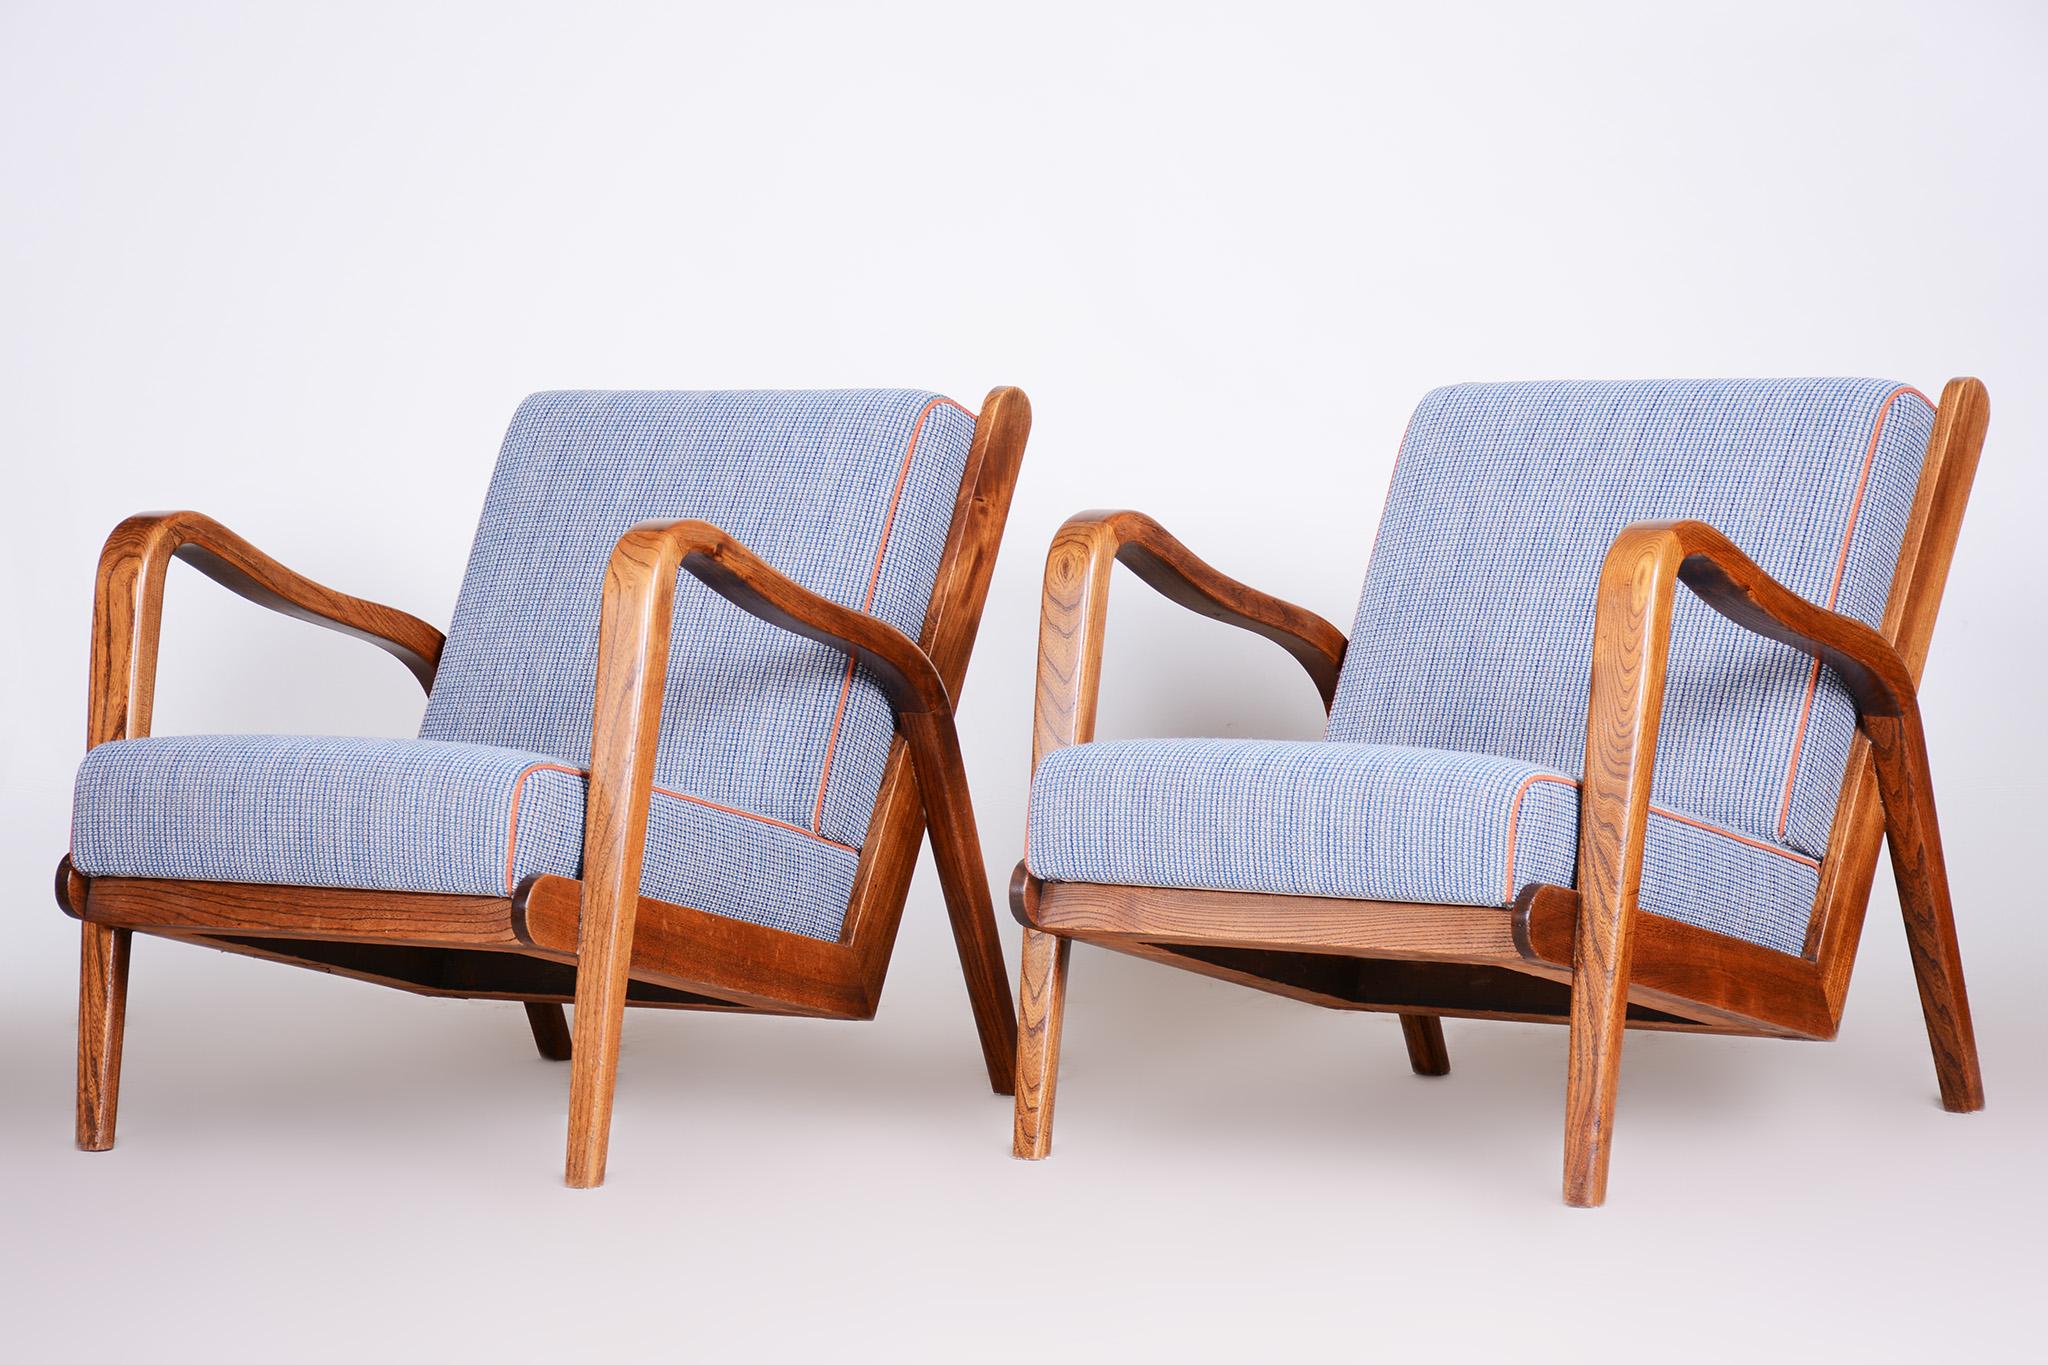 Ash Mid Century Armchairs Made in Czechia '40s, by Jan Vanek, Fully Restored 2